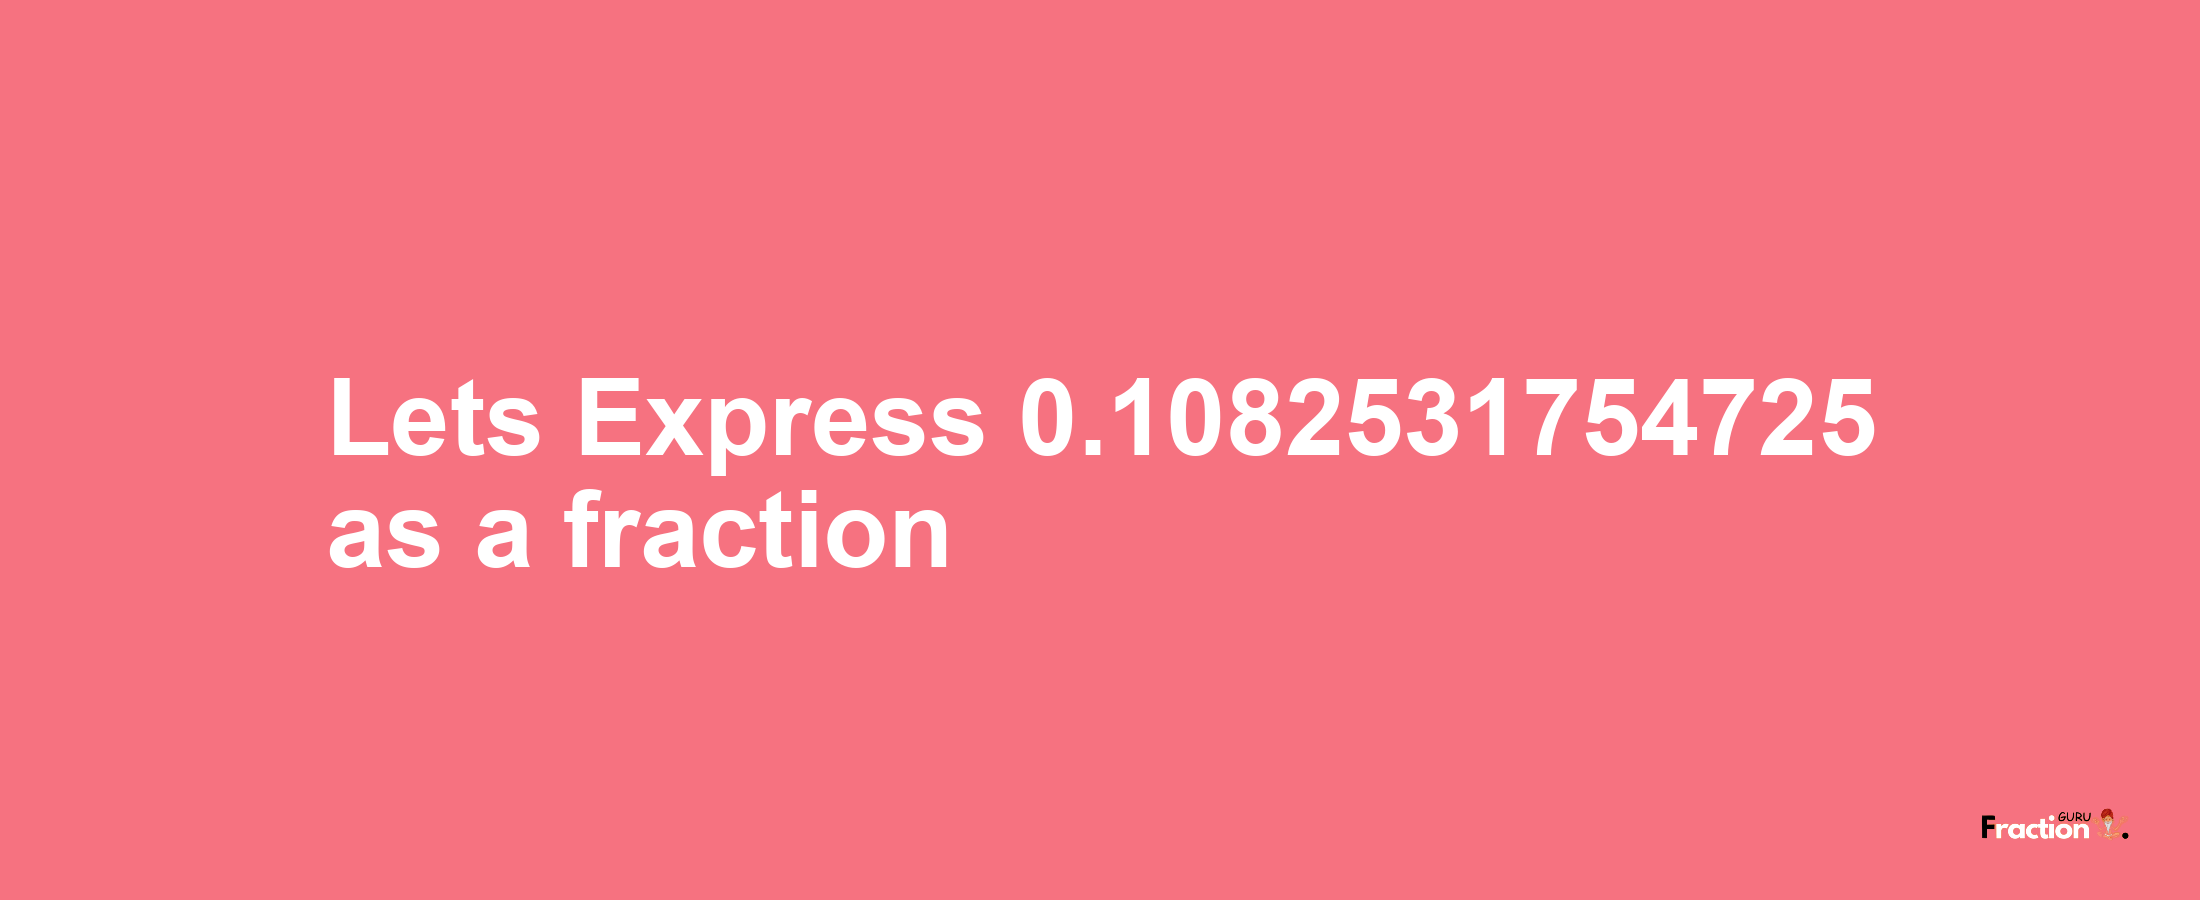 Lets Express 0.1082531754725 as afraction